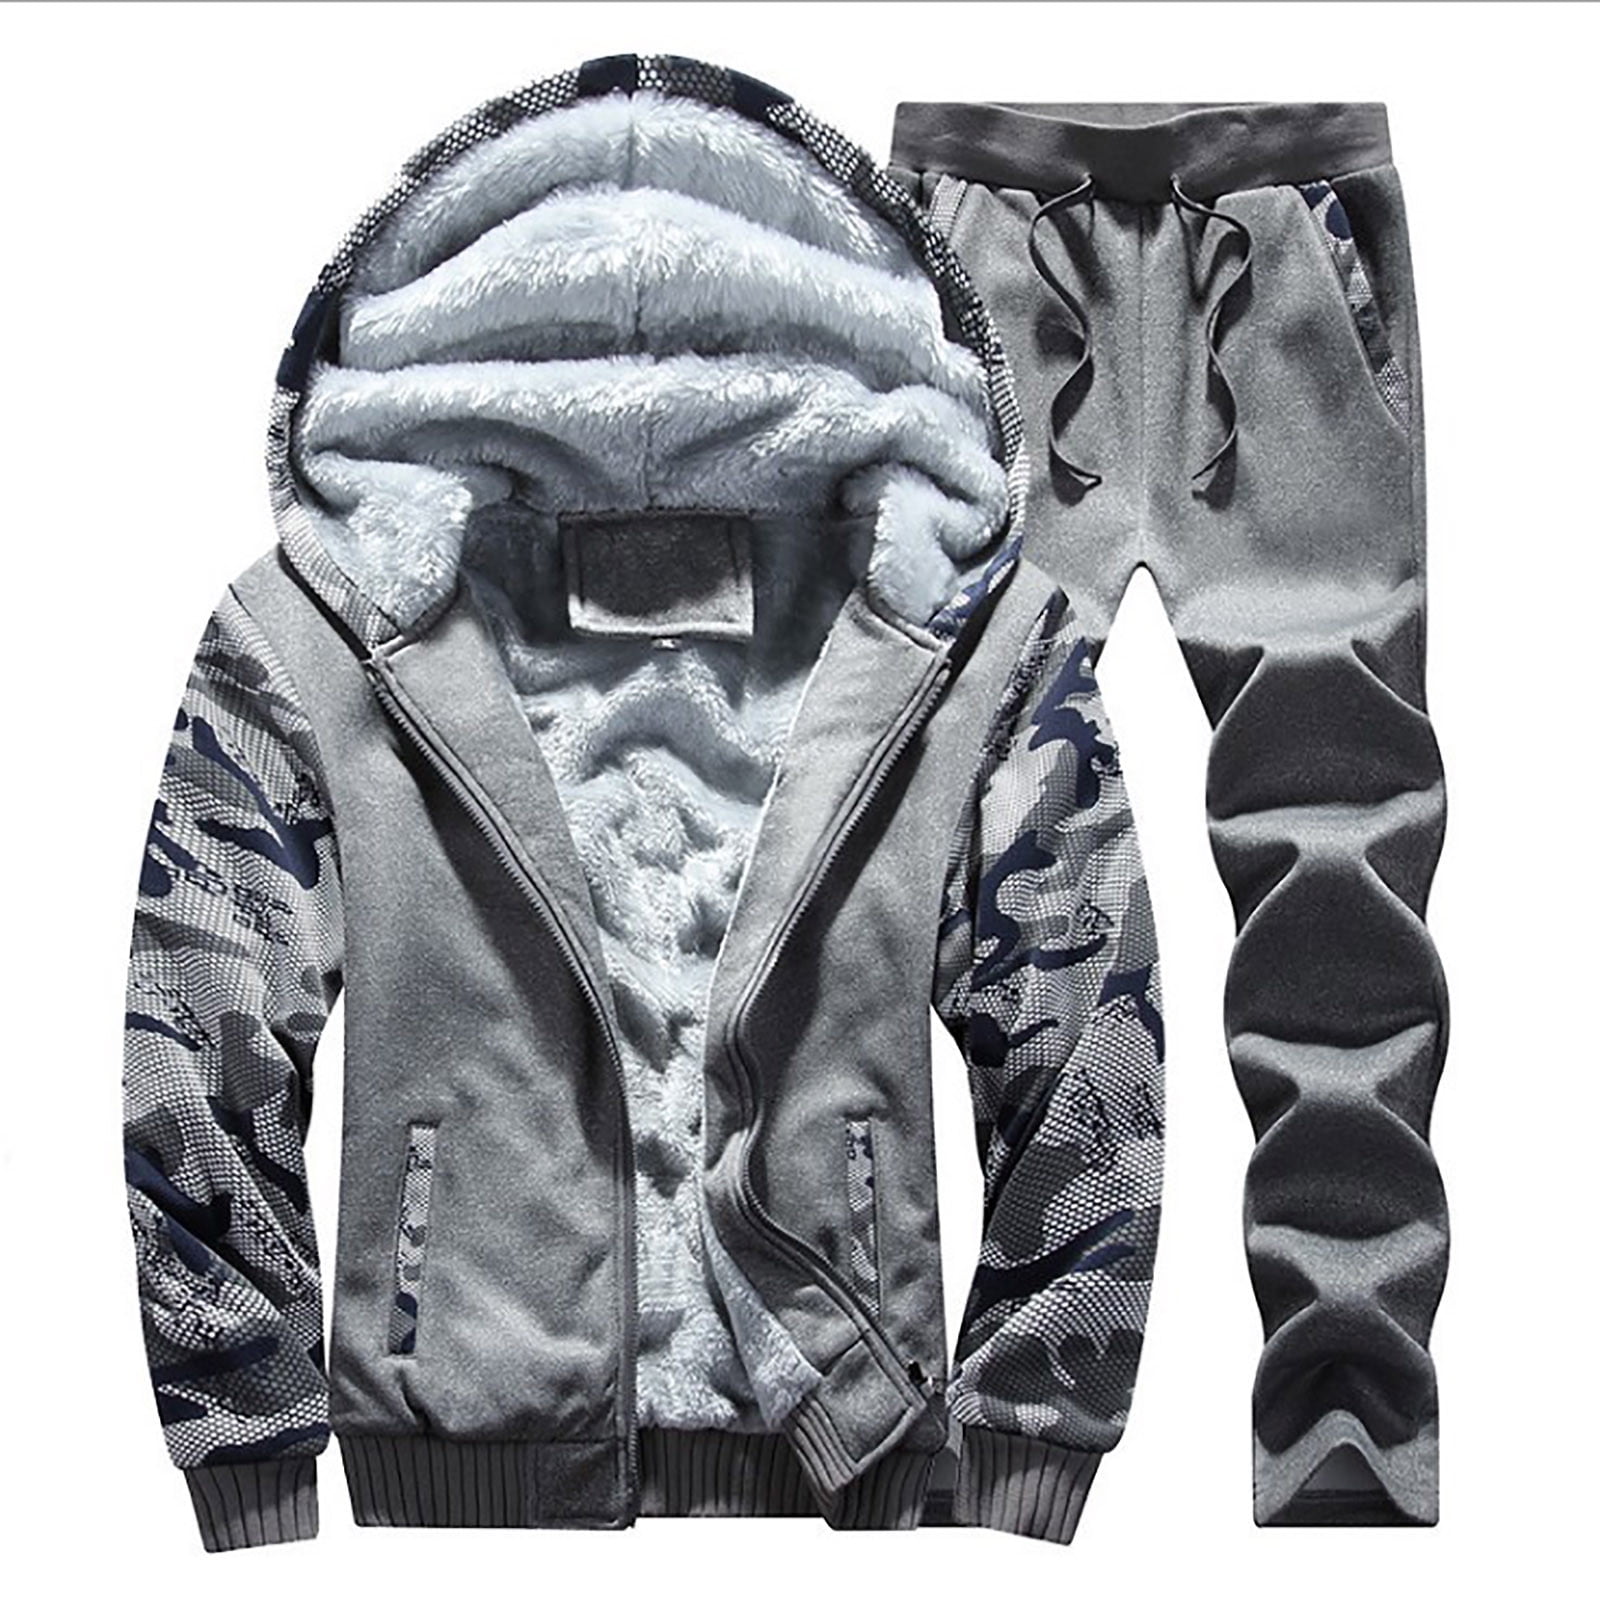 AOOCHASLIY Mens Sweat Suits Sets Clearance Jogging Suits Camouflage ...